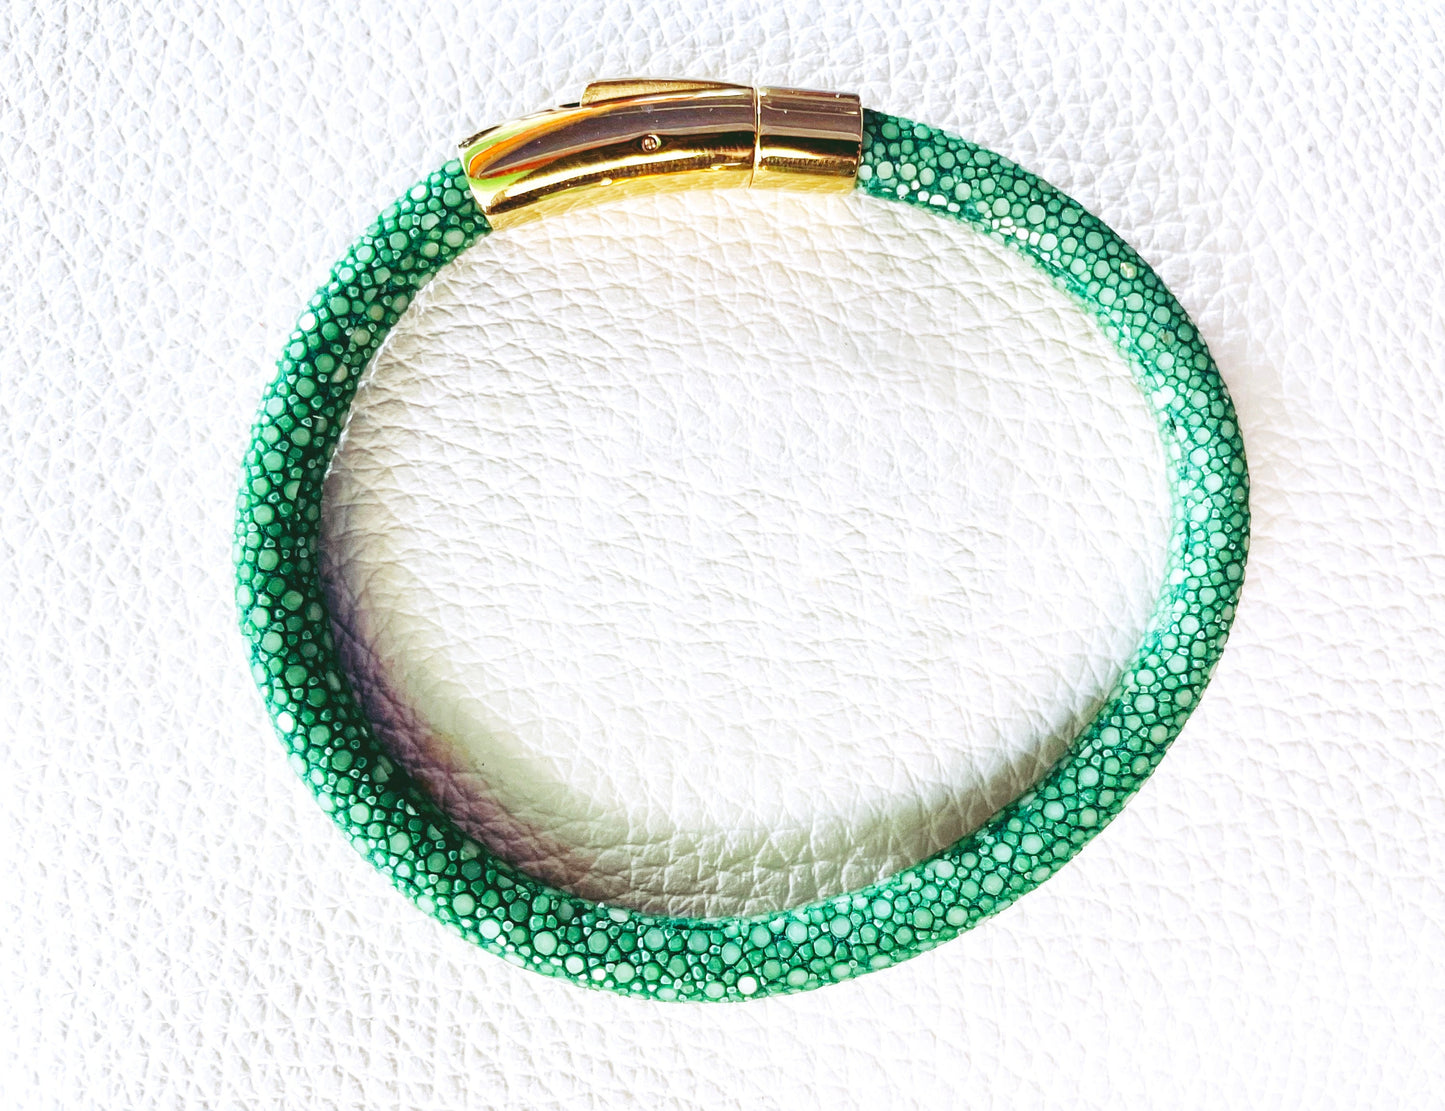 Stingray Leather Bracelet | Green Bracelet | Handmade Jewelry | Personalized gifts | Christmas gifts | Gifts for him |Gift For Her, Magnetic Closure Stingray Leather Bracelets